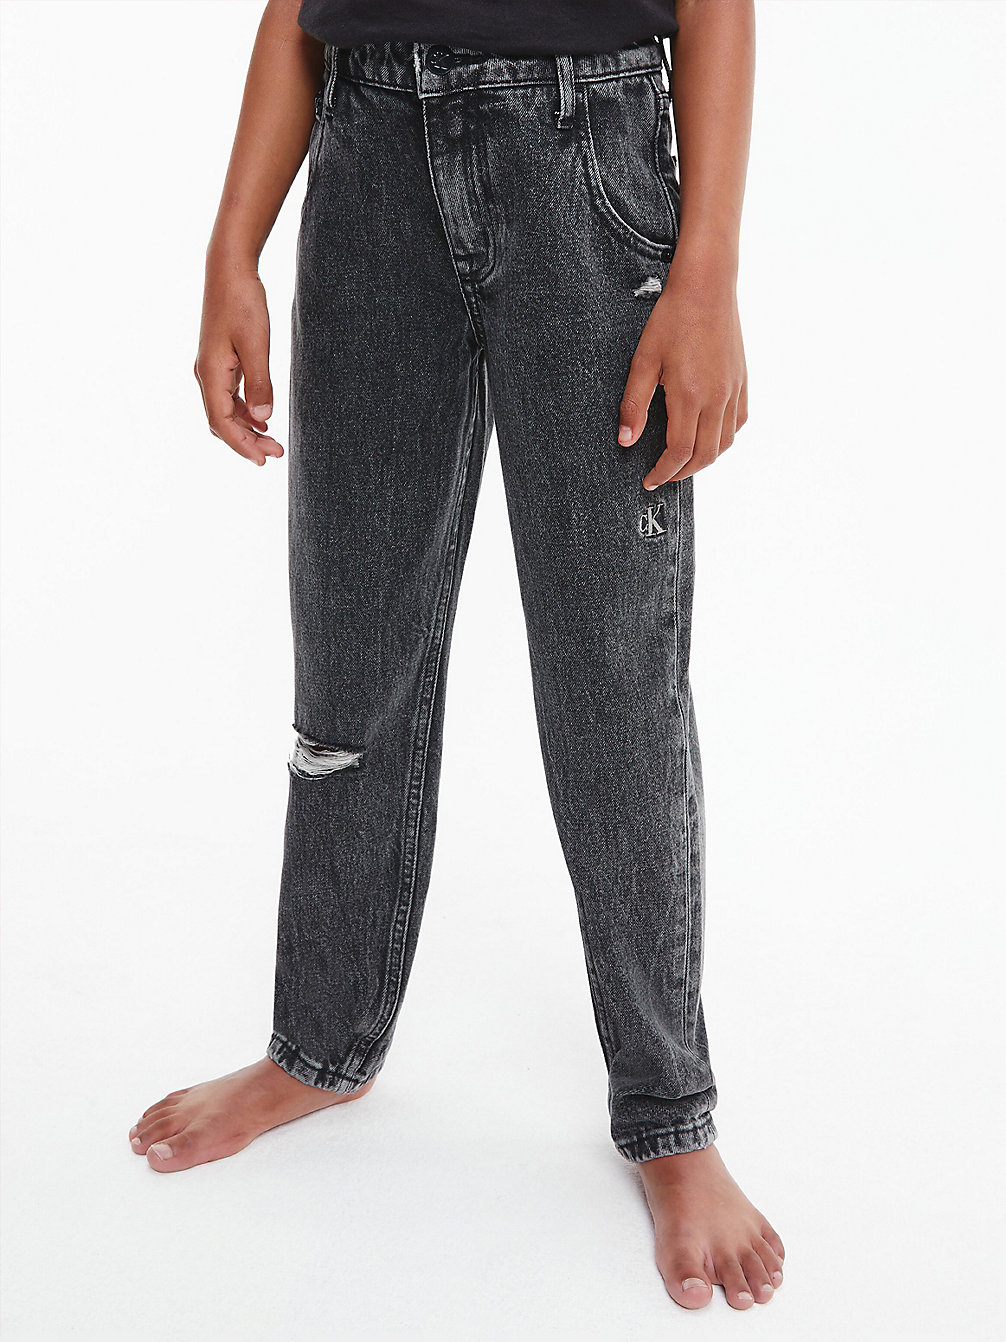 WASHED STONE GREY BLACK Relaxed Barrel Leg Jeans undefined Maedchen Calvin Klein